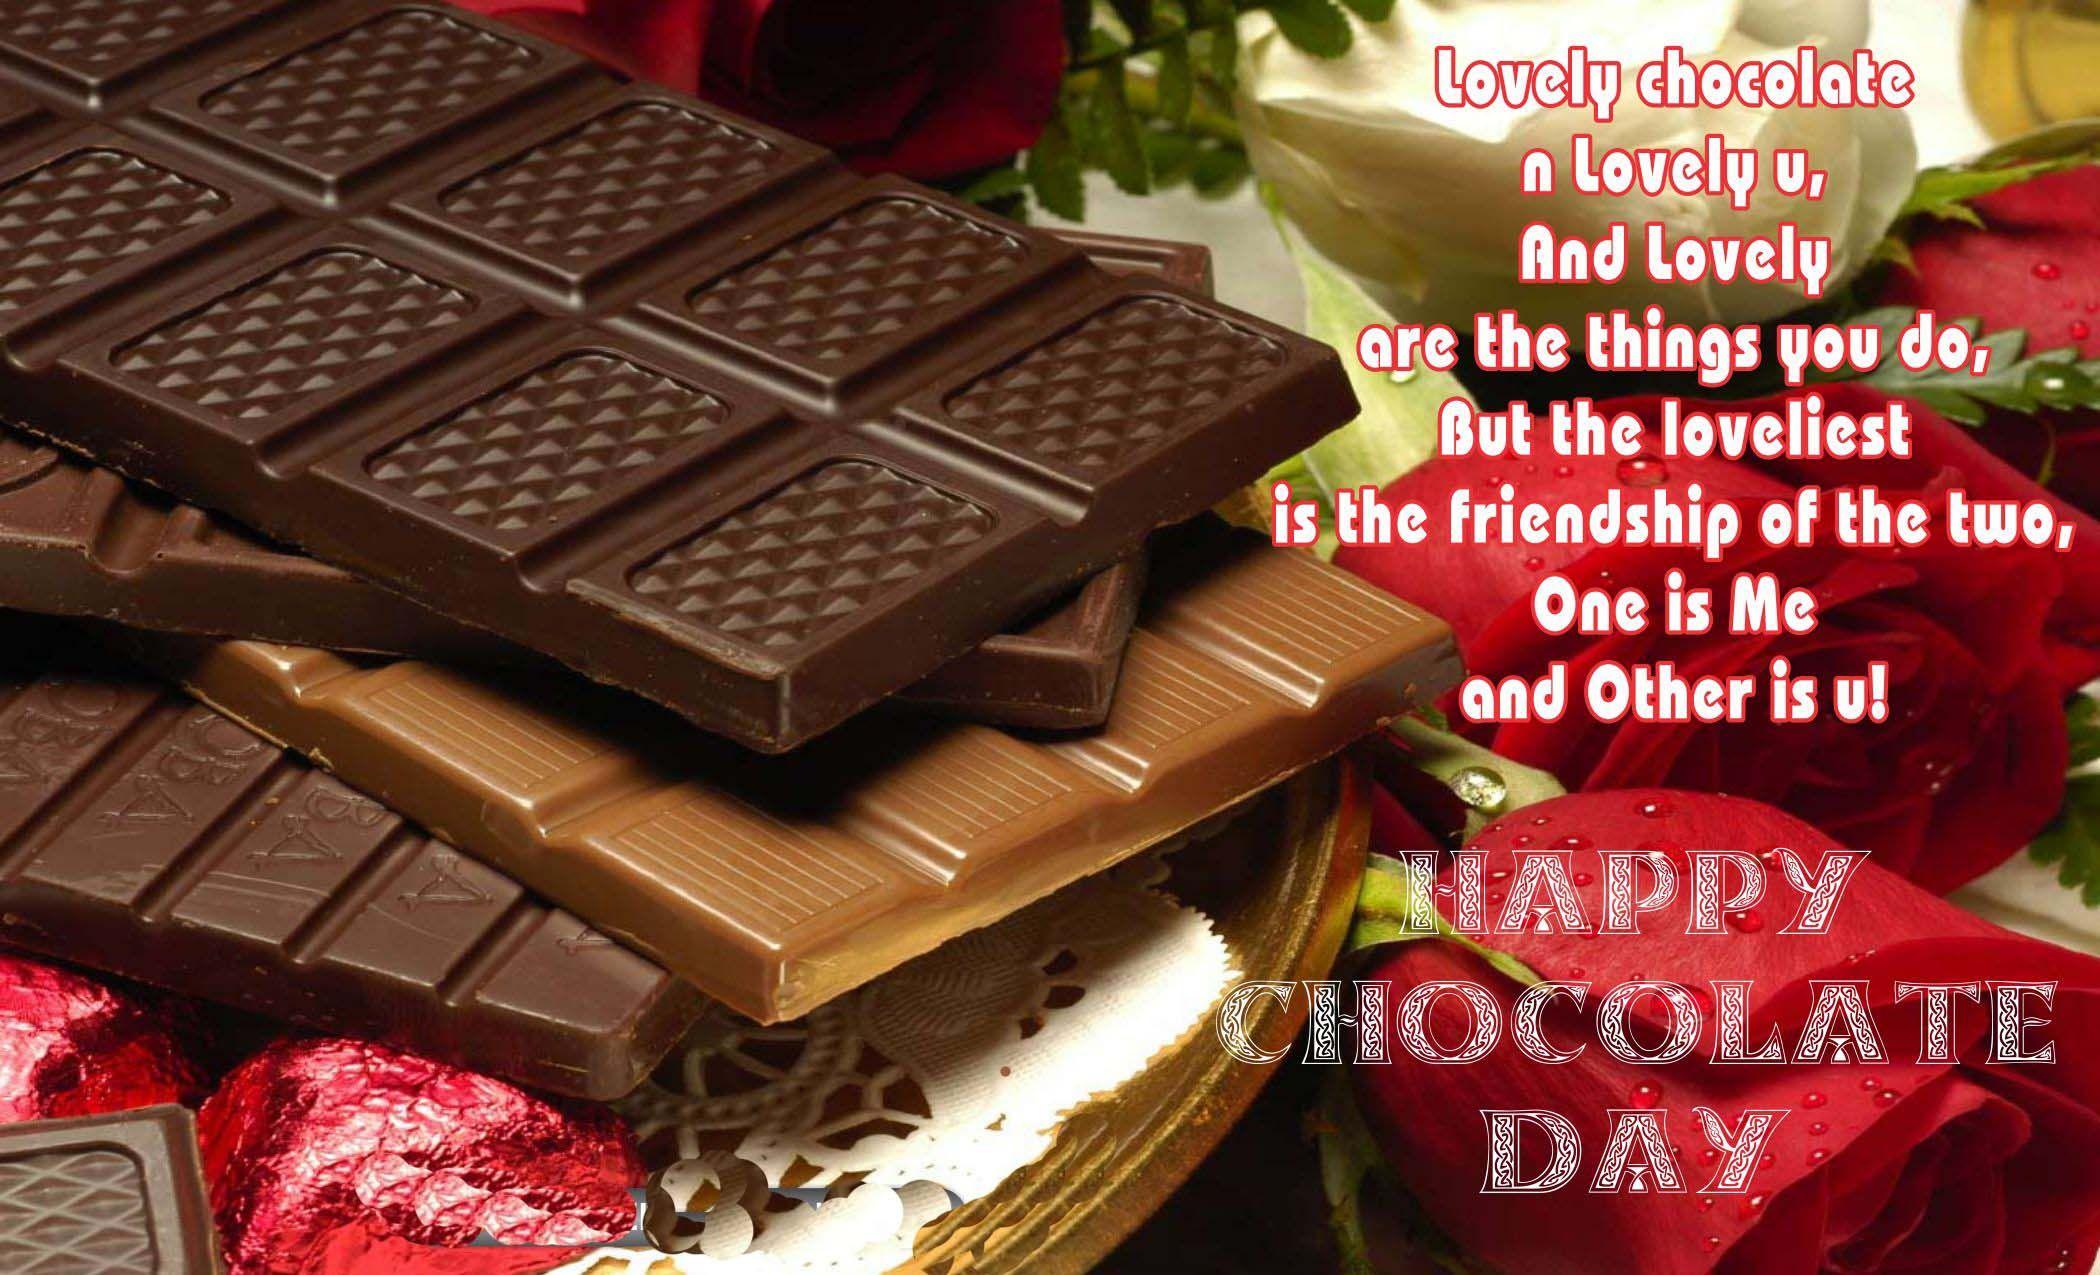 Happy chocolate day image .in.com